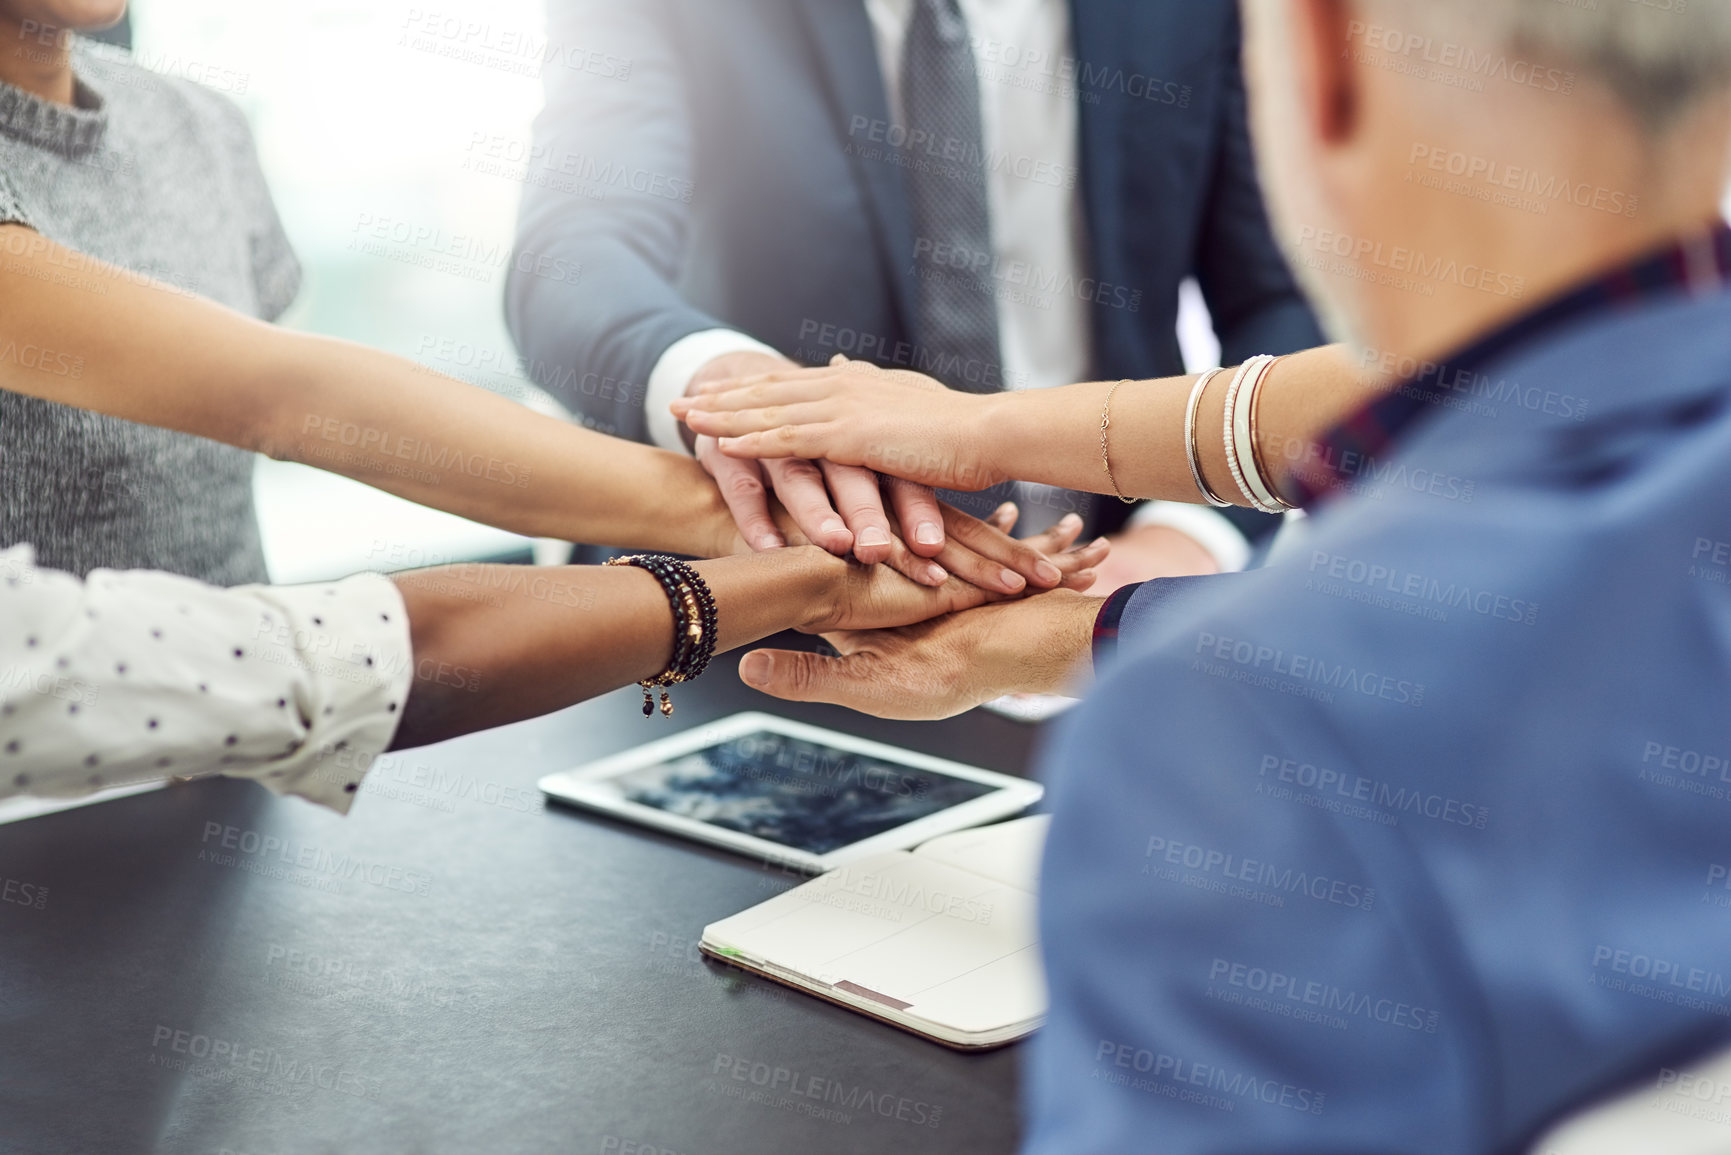 Buy stock photo Cropped shot of businesspeople joining their hands together in unity